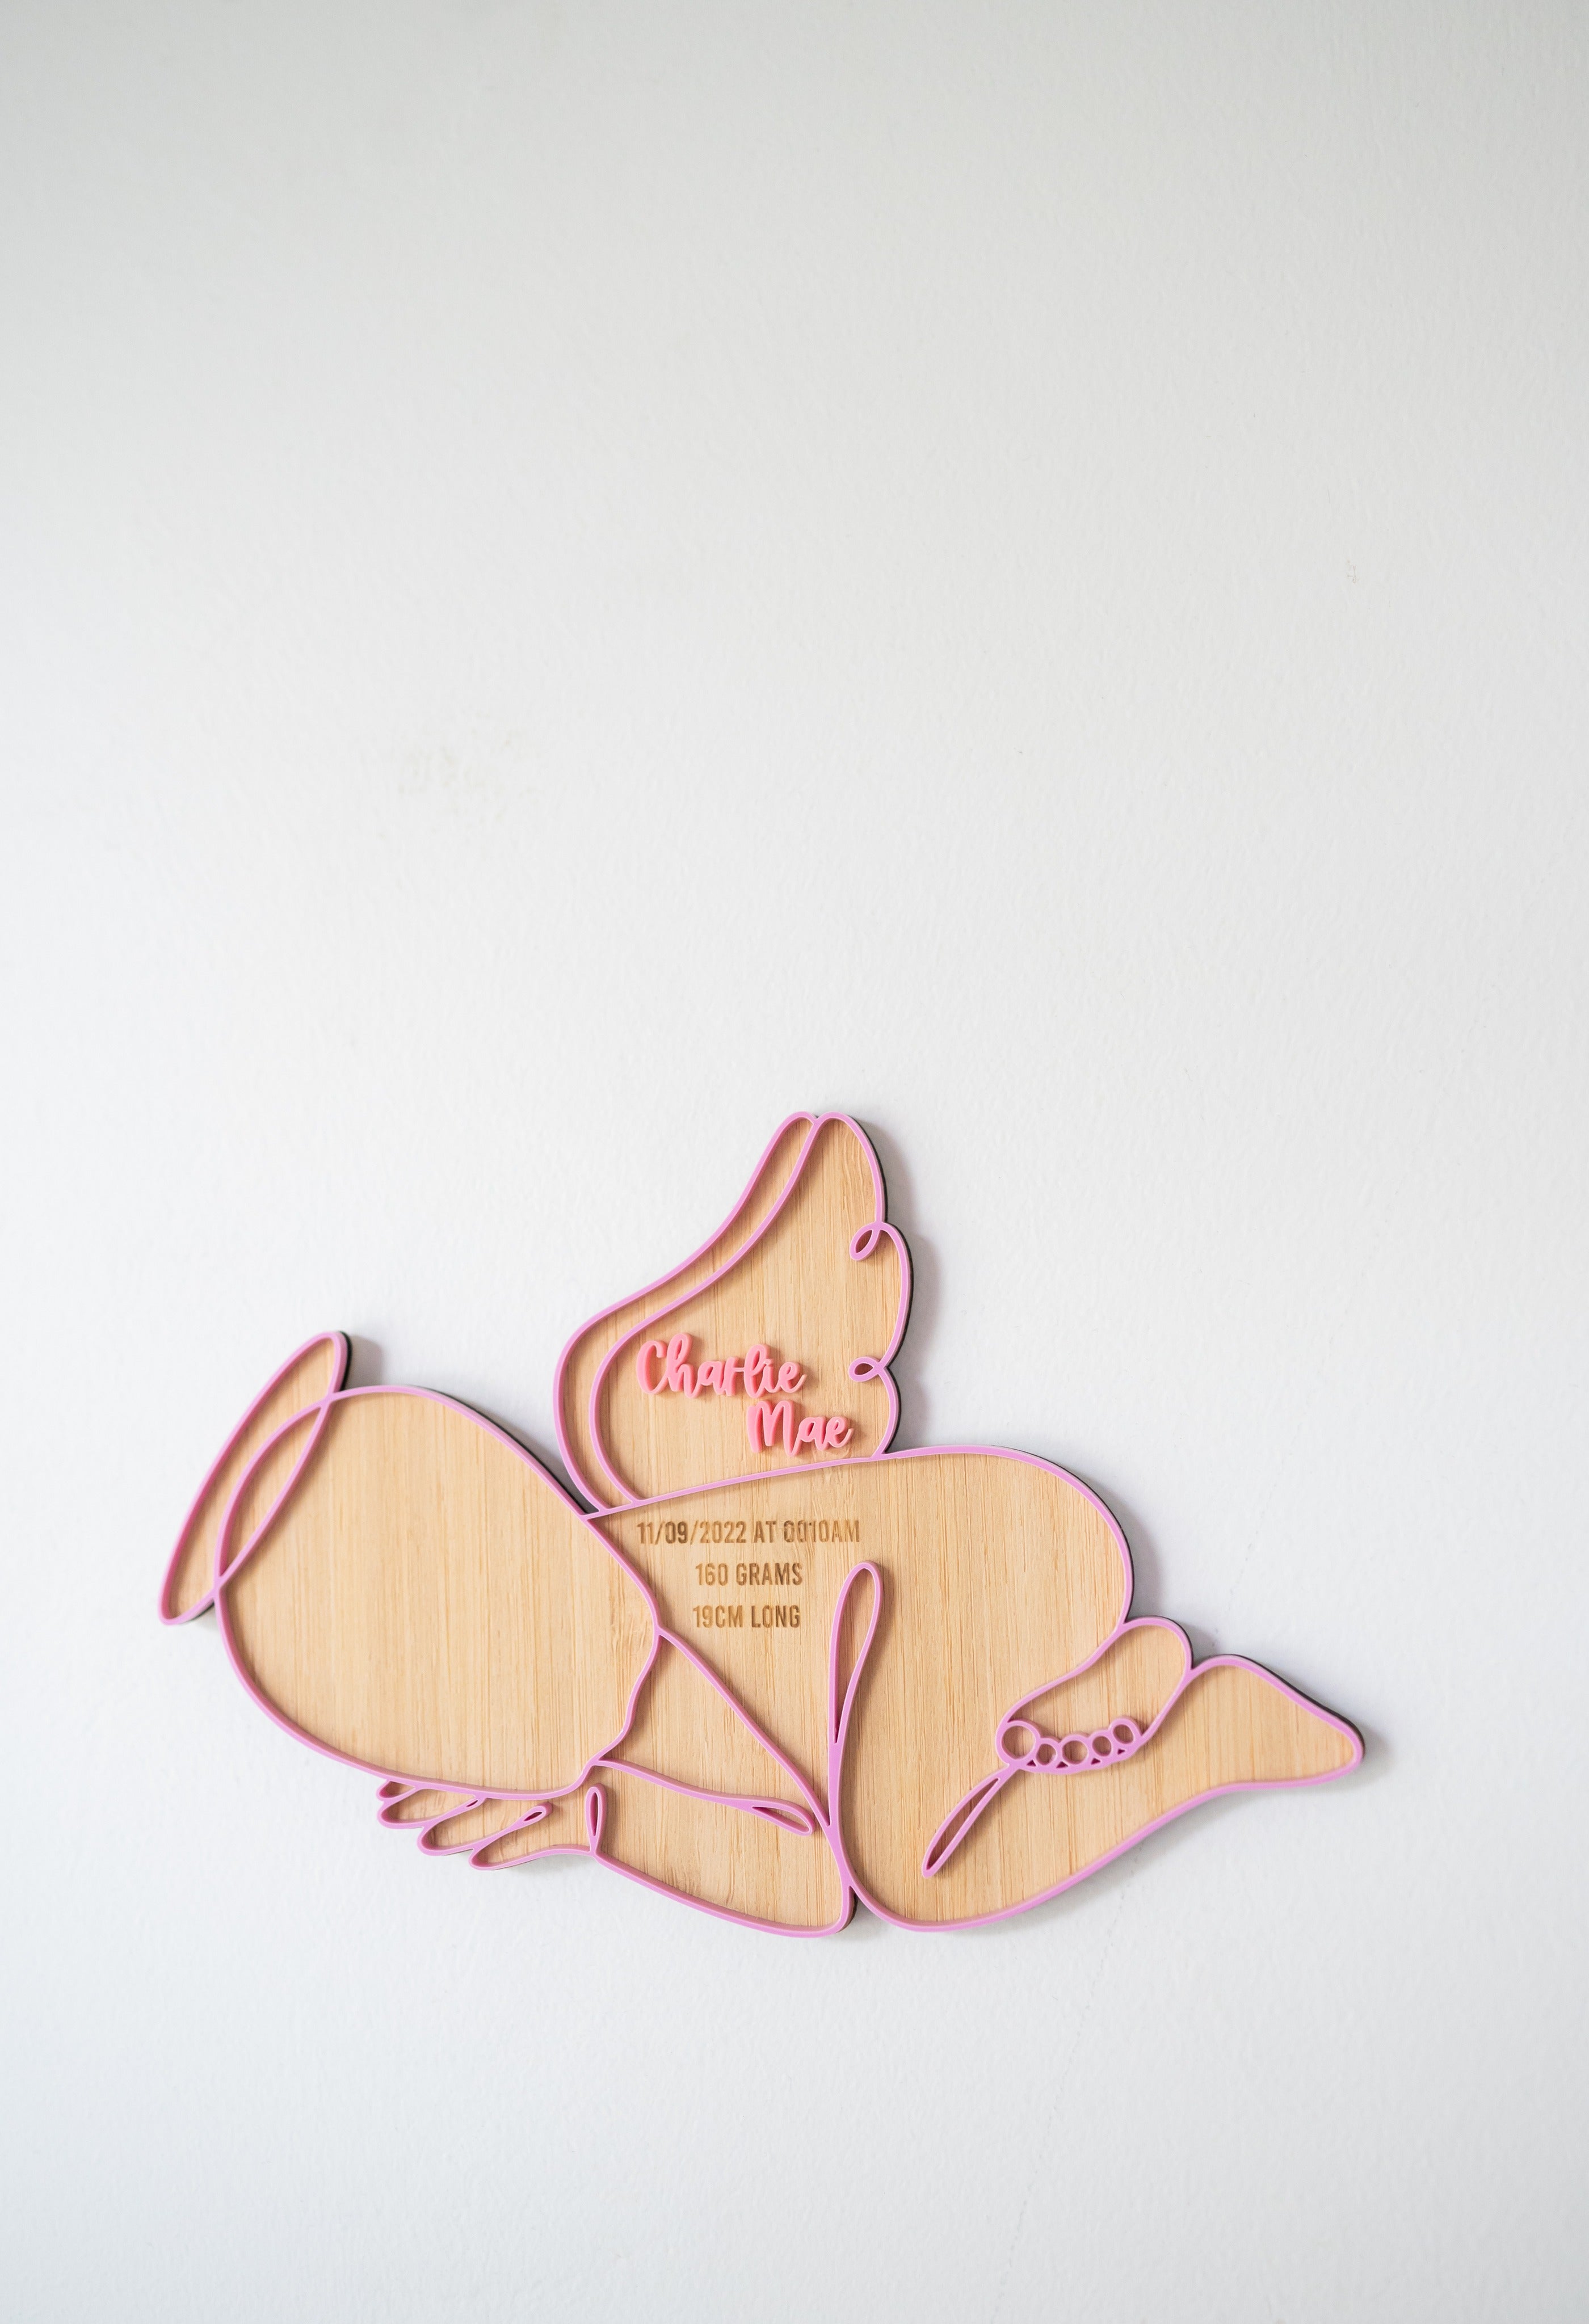 Angel Baby 1:1 Scale Plaque